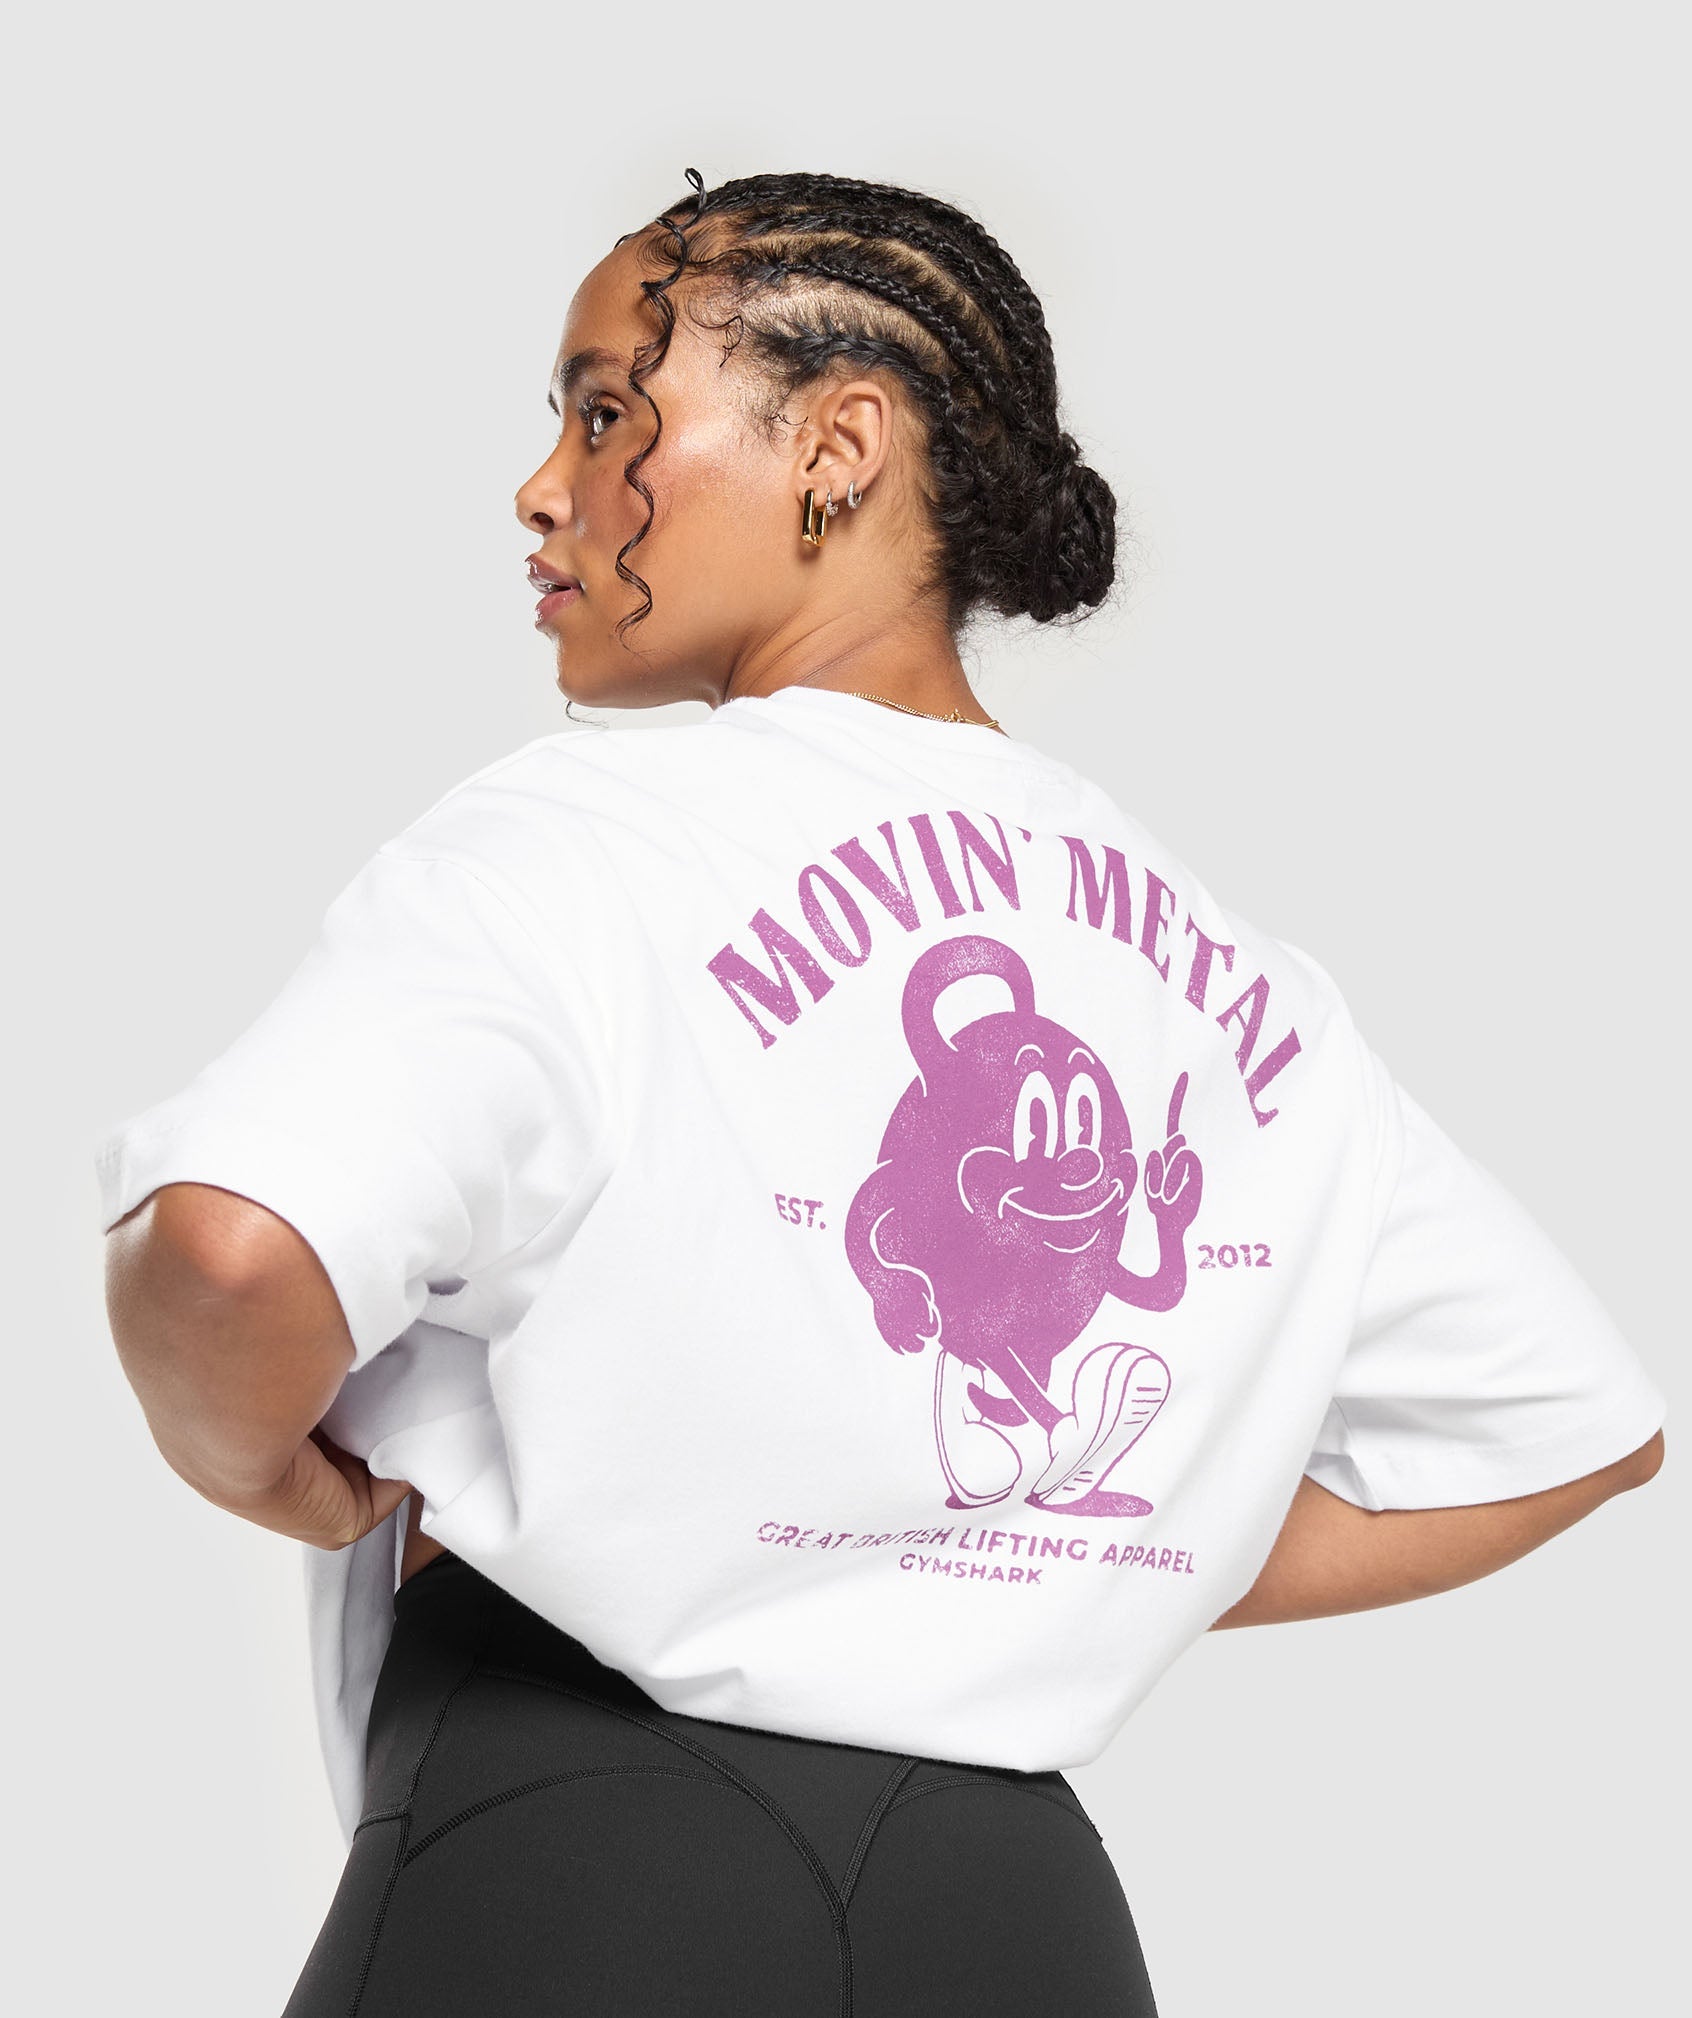 Movin' Metal T-Shirt in White - view 7